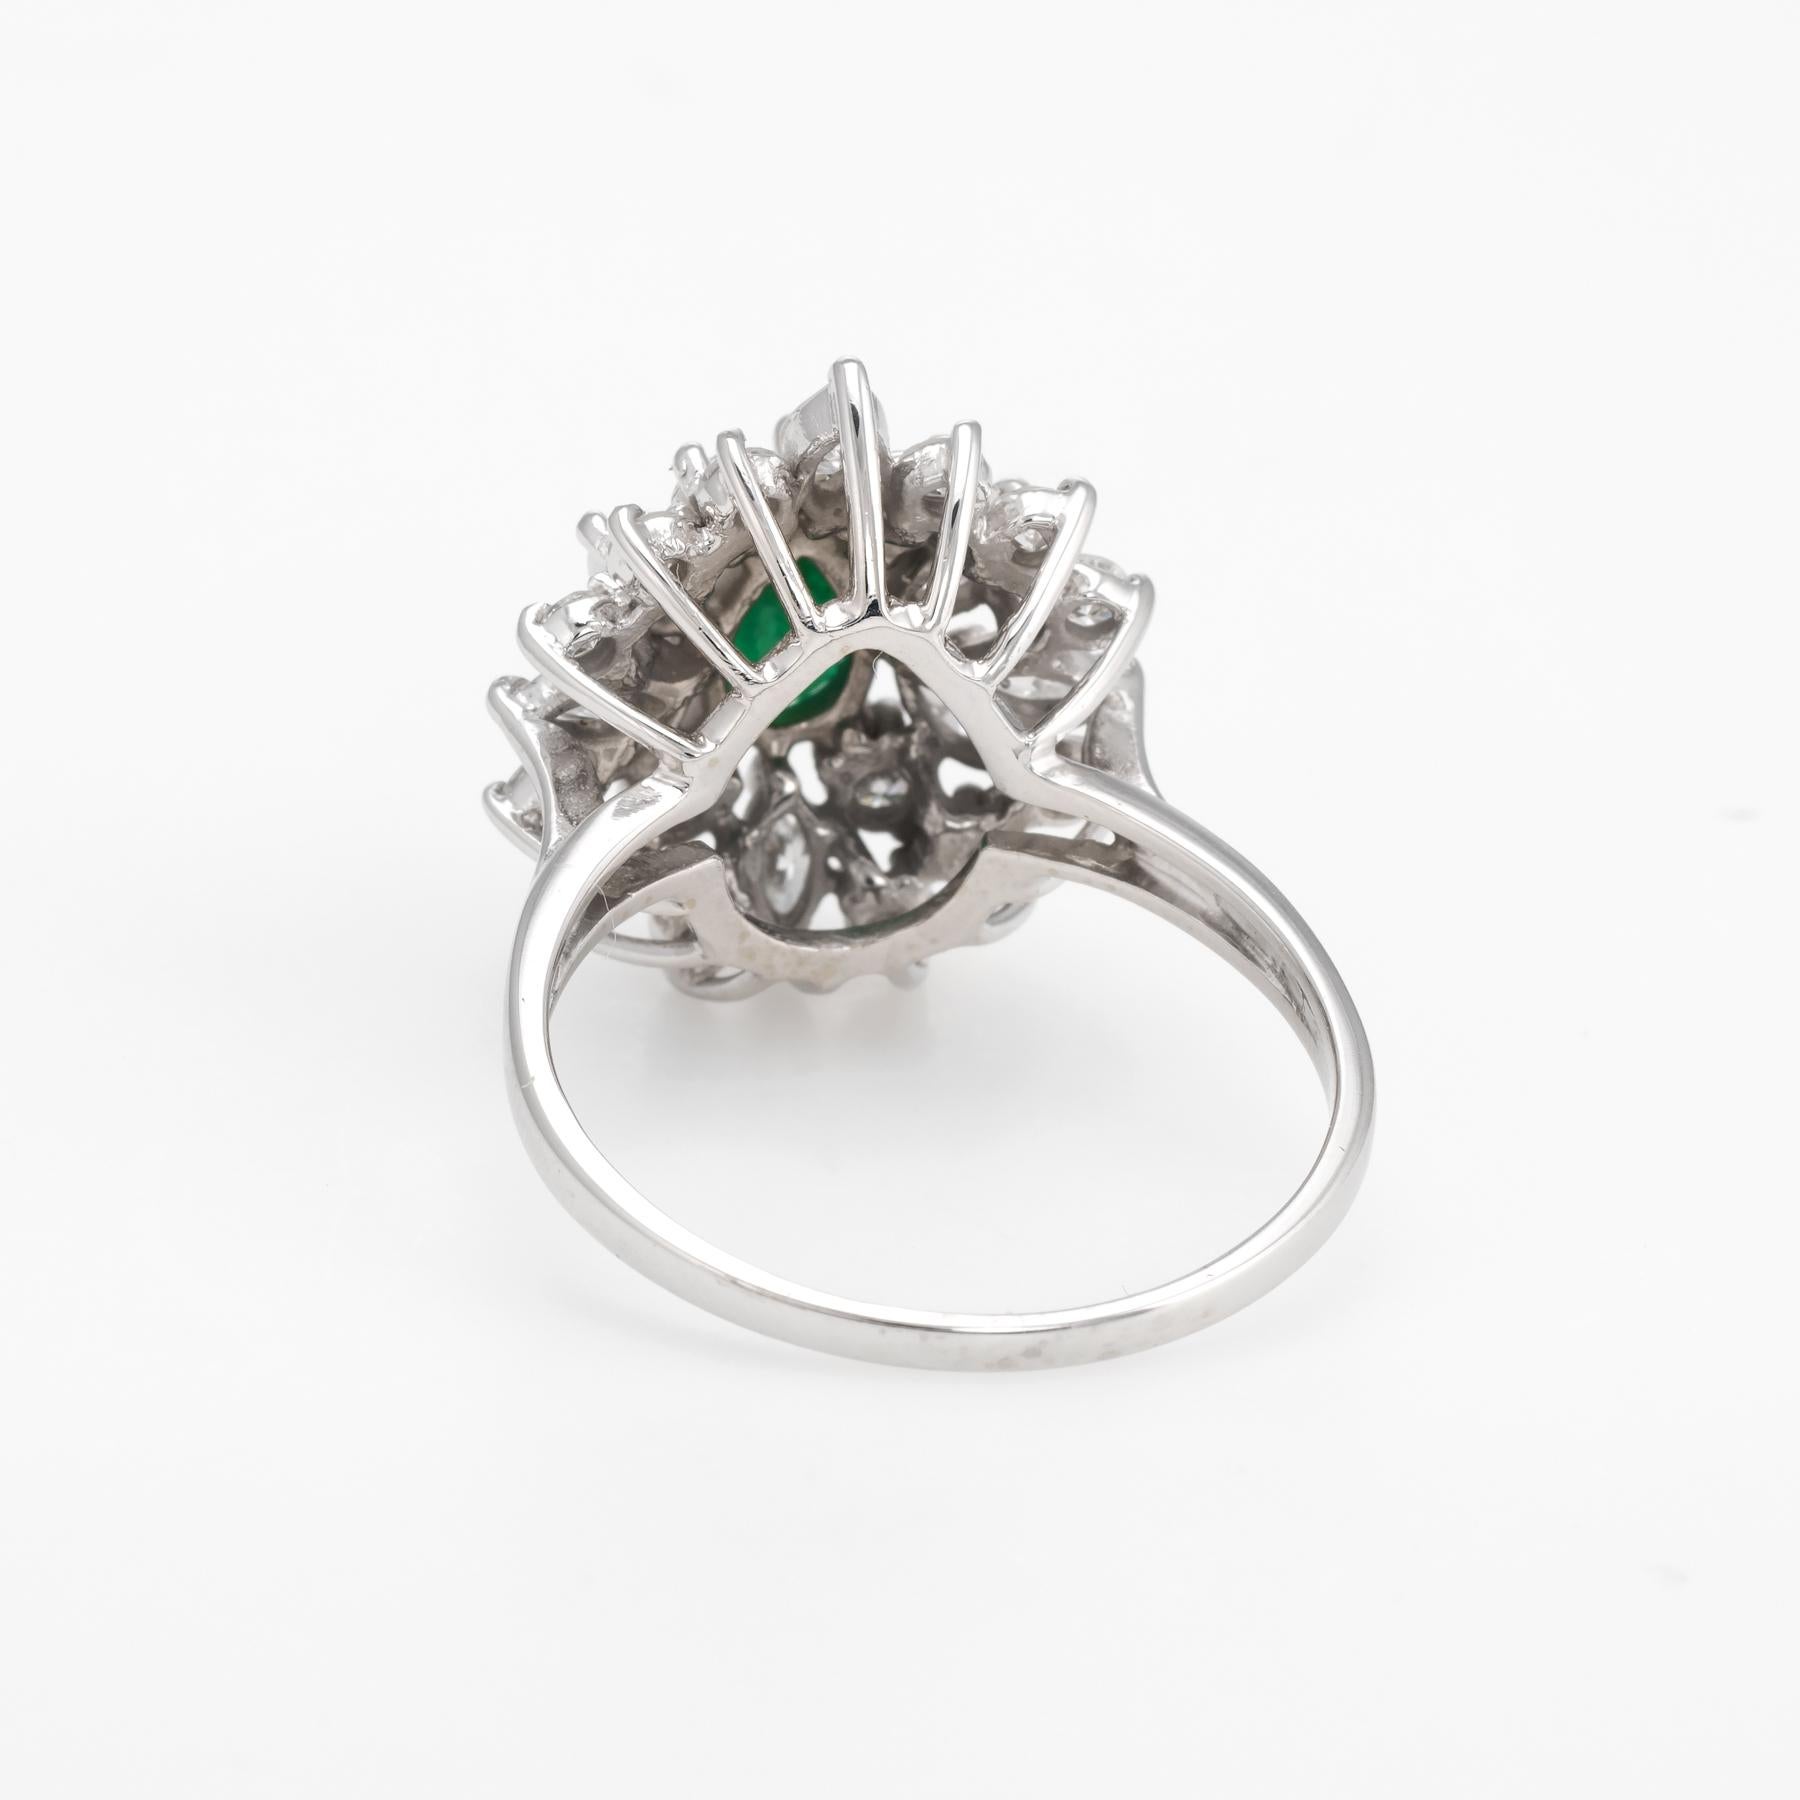 Women's Vintage Diamond Emerald Ring Cluster Oval Cocktail 14 Karat White Gold Jewelry